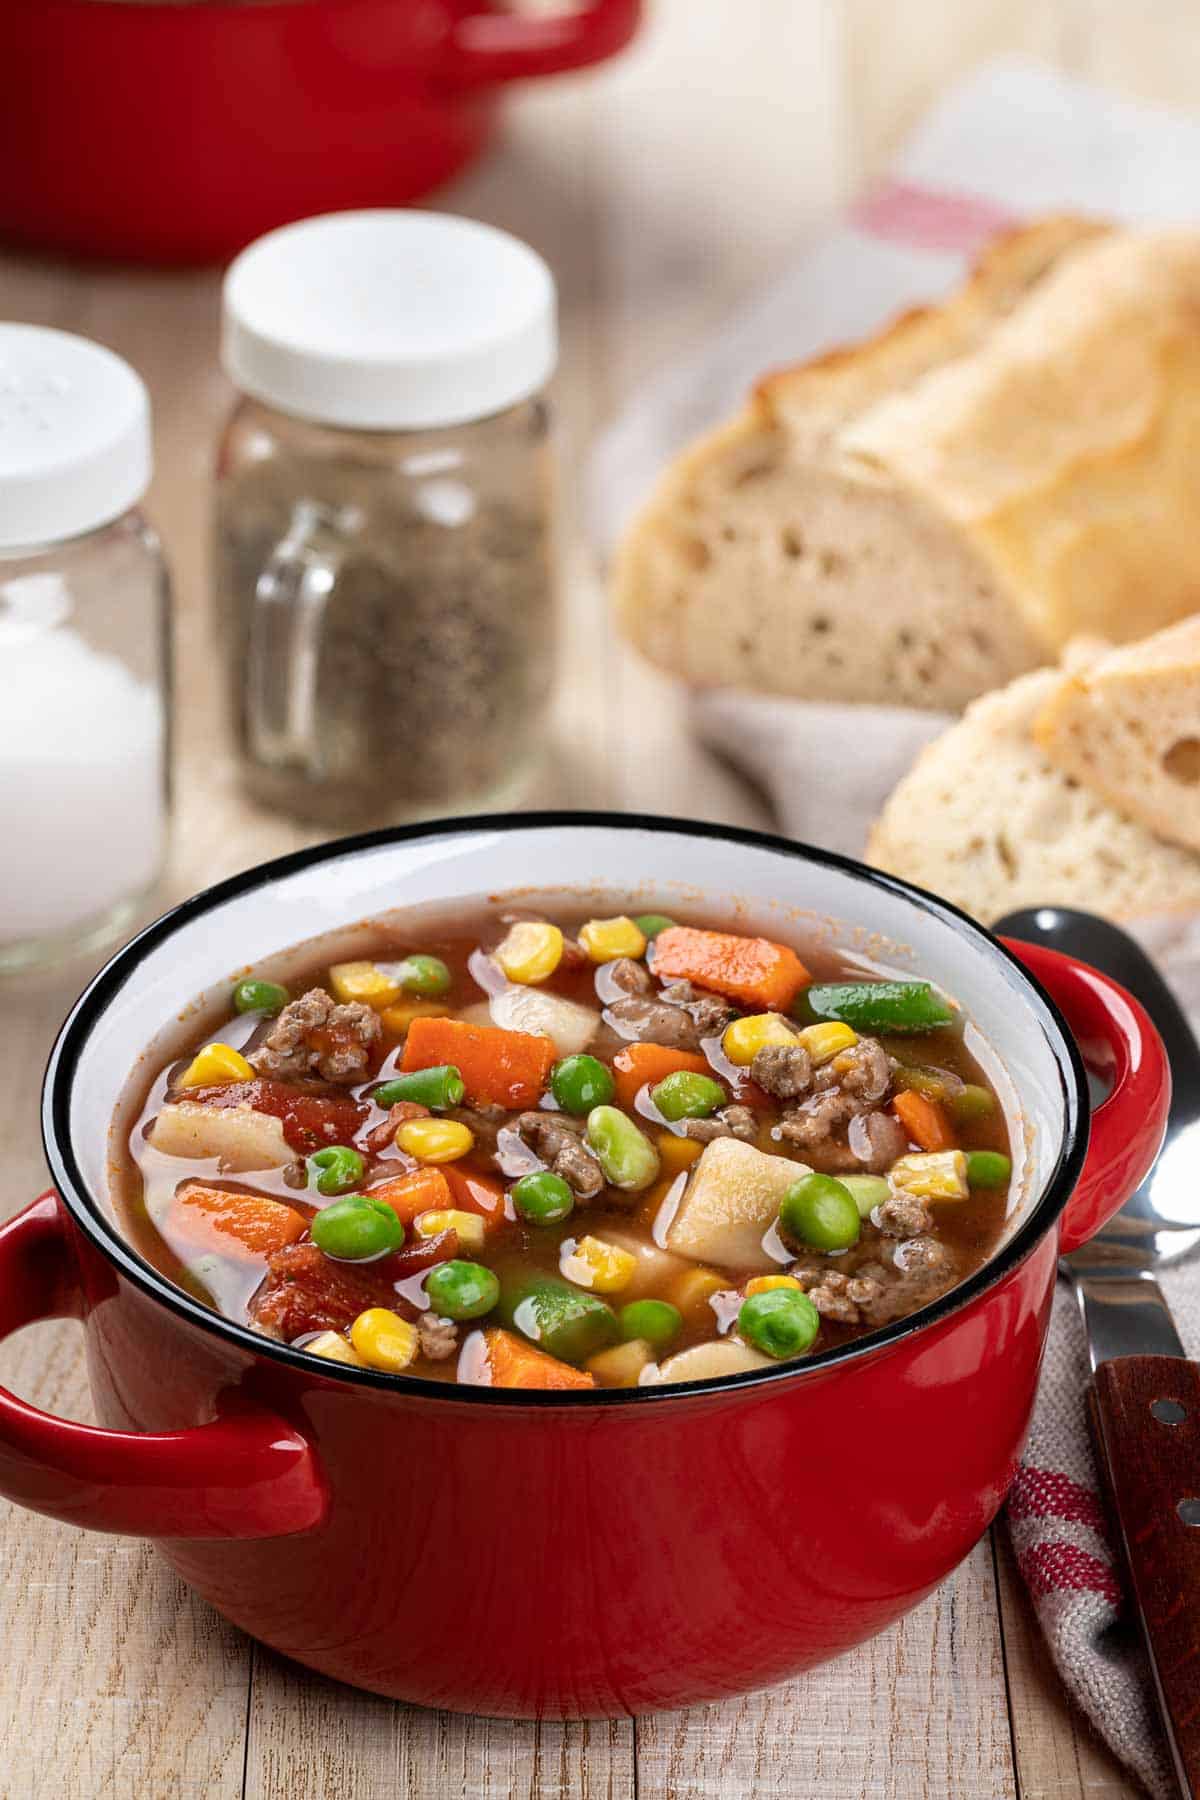 Bowl of vegetable beef soup with a loaf of cut French bread in the background.